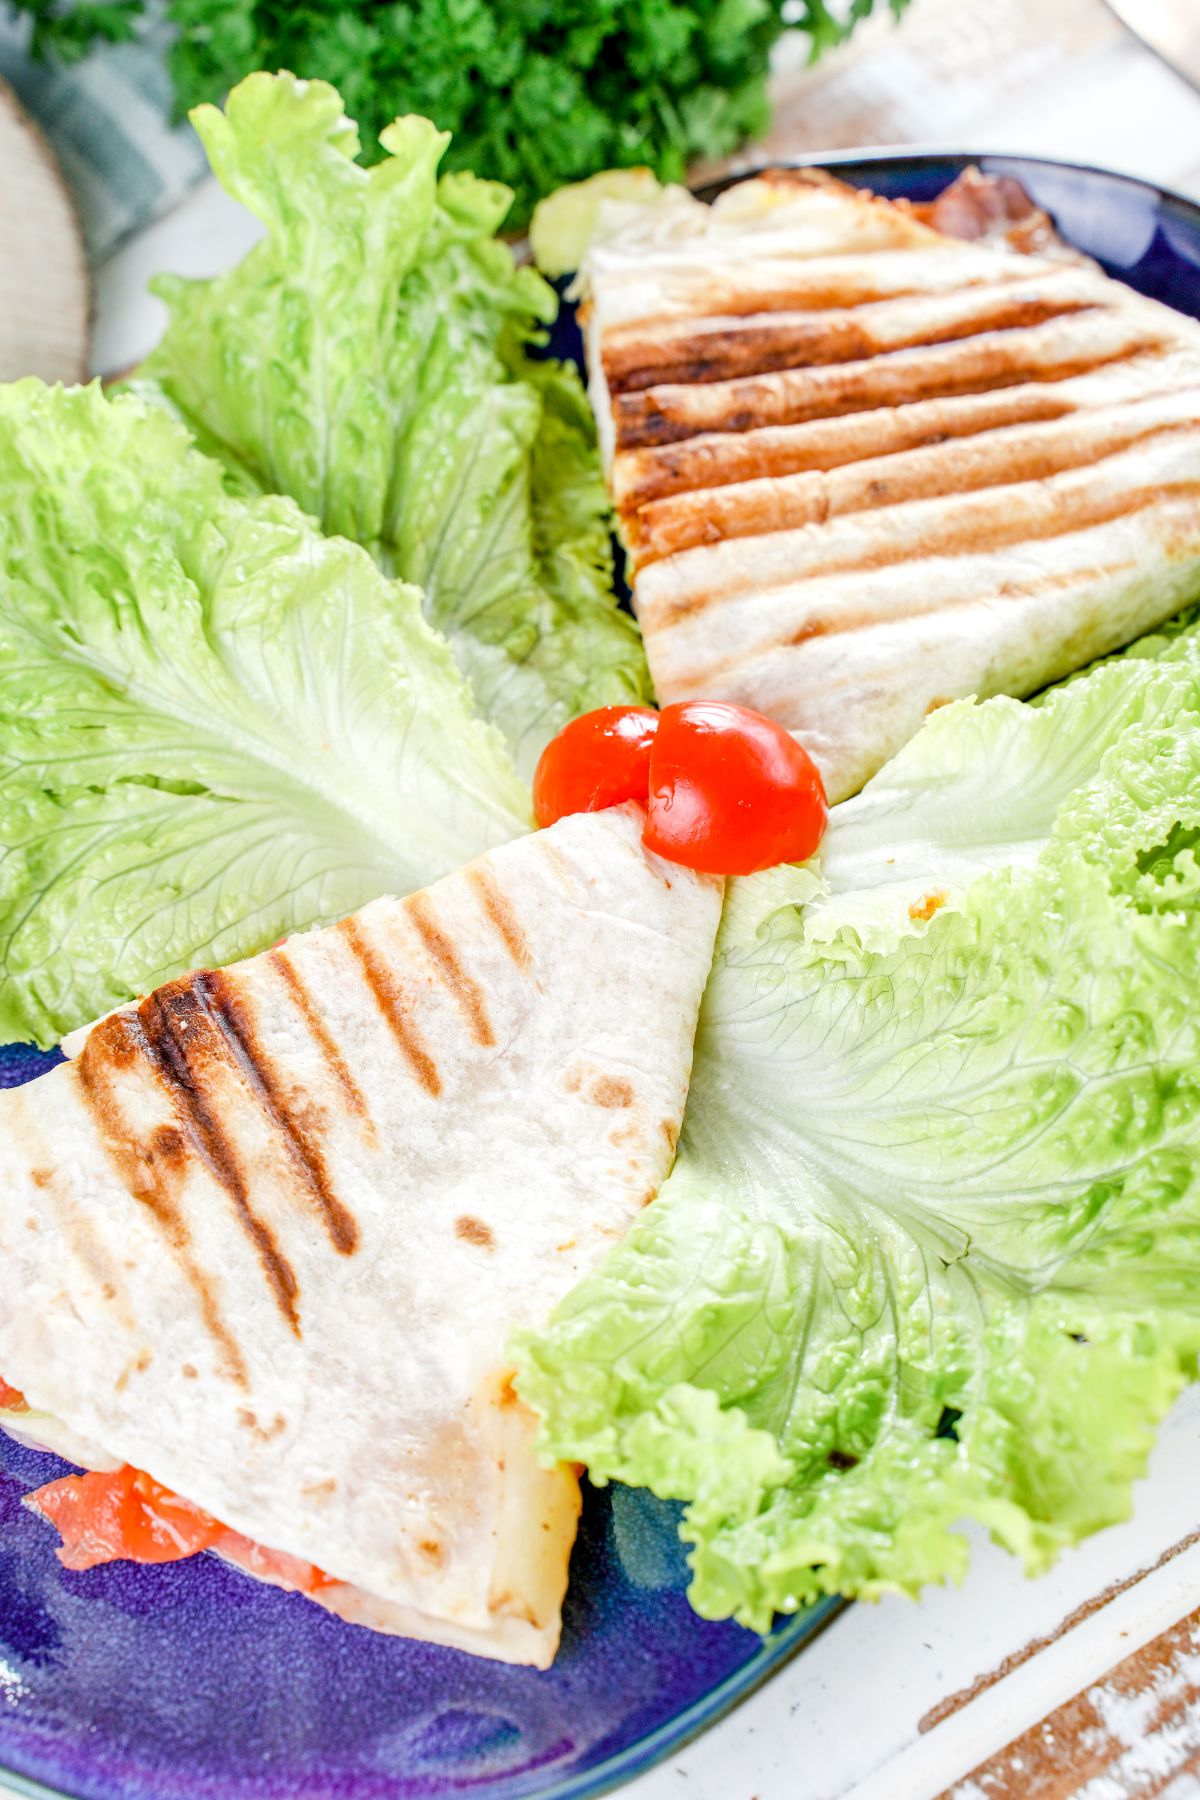 tortilla wrap on blue plate with lettuce leaves